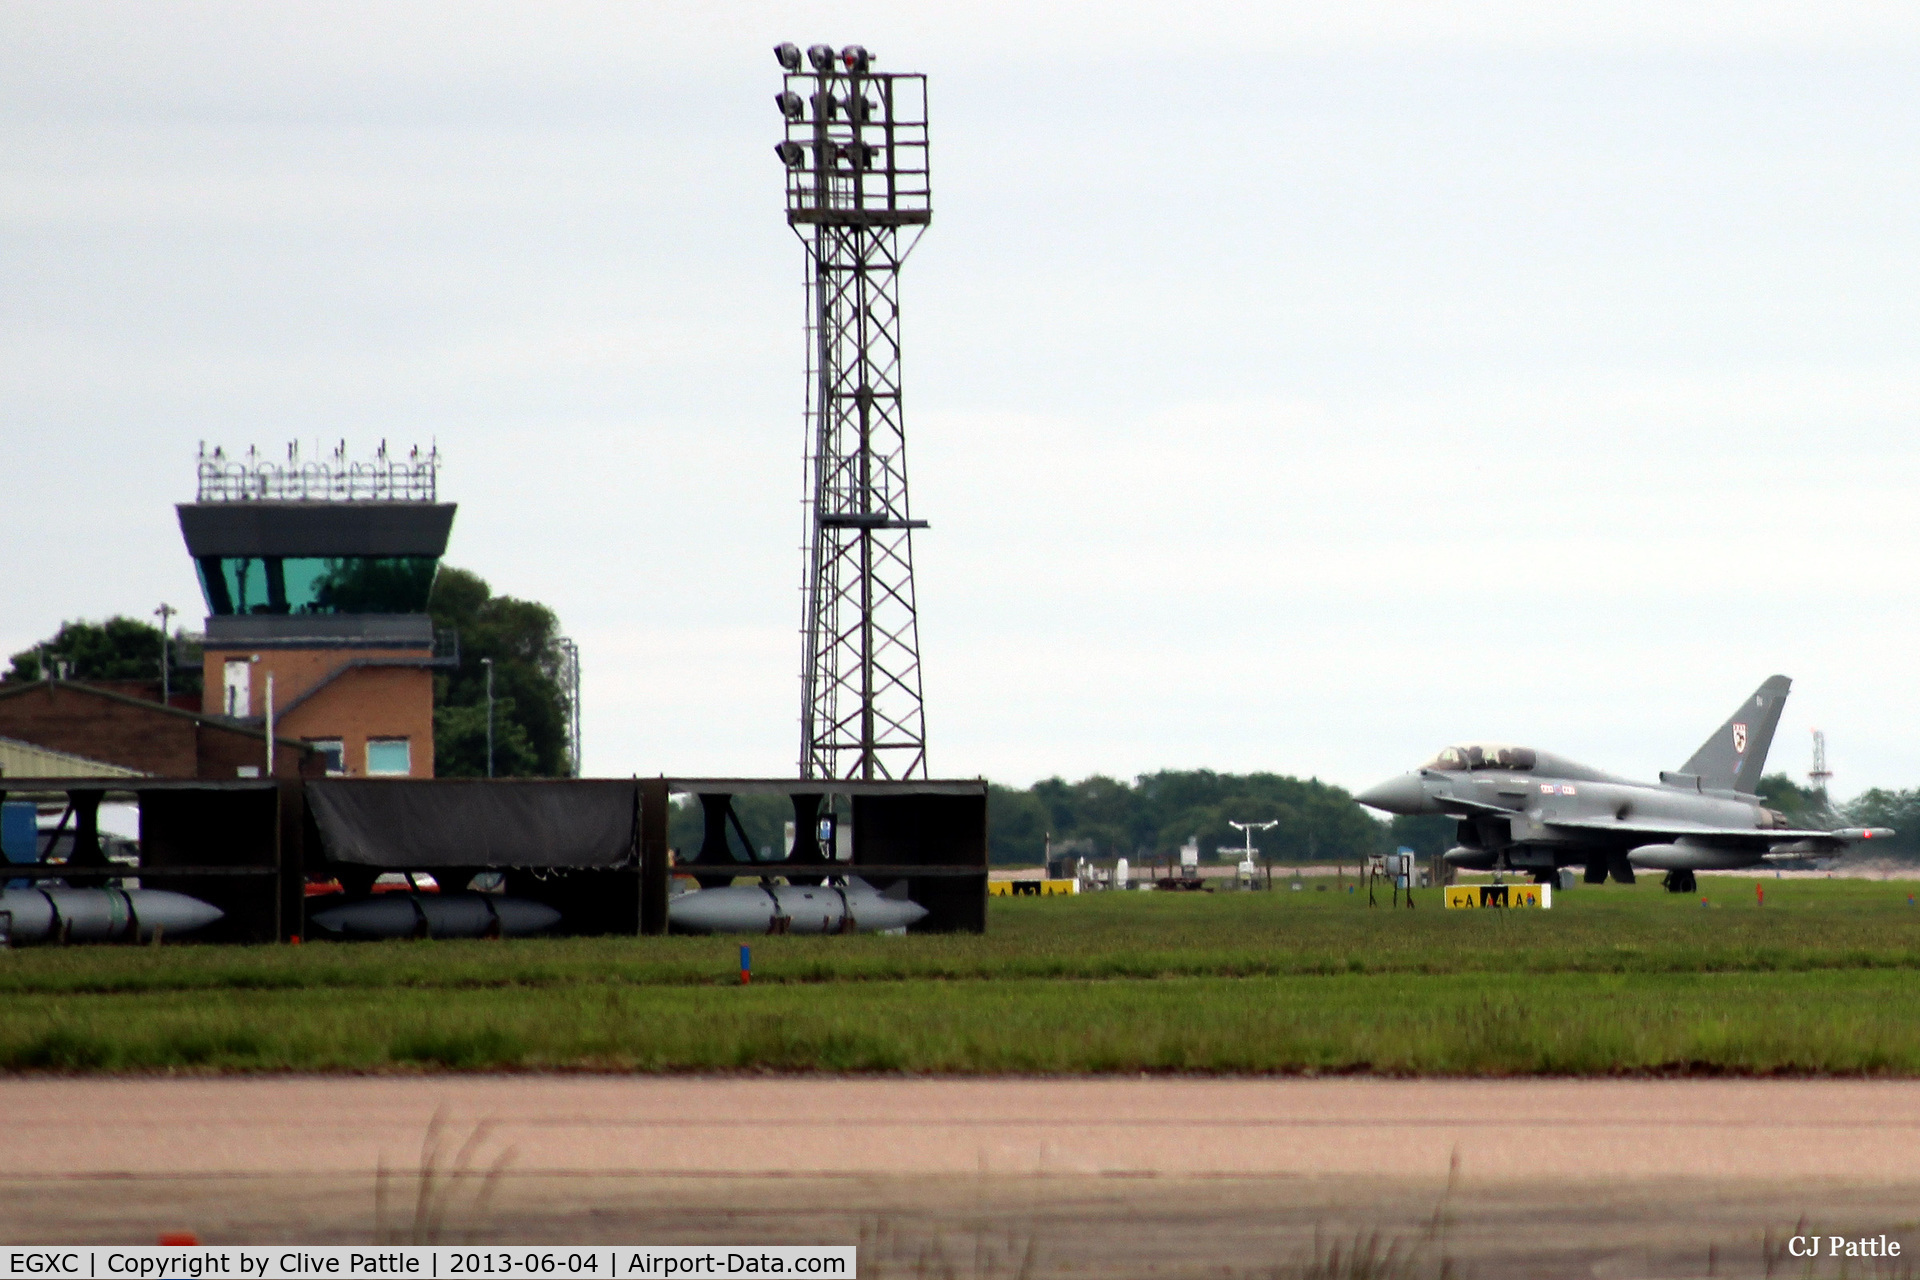 RAF Coningsby Airport, Coningsby, England United Kingdom (EGXC) - ATC Tower detail at RAF Coningsby